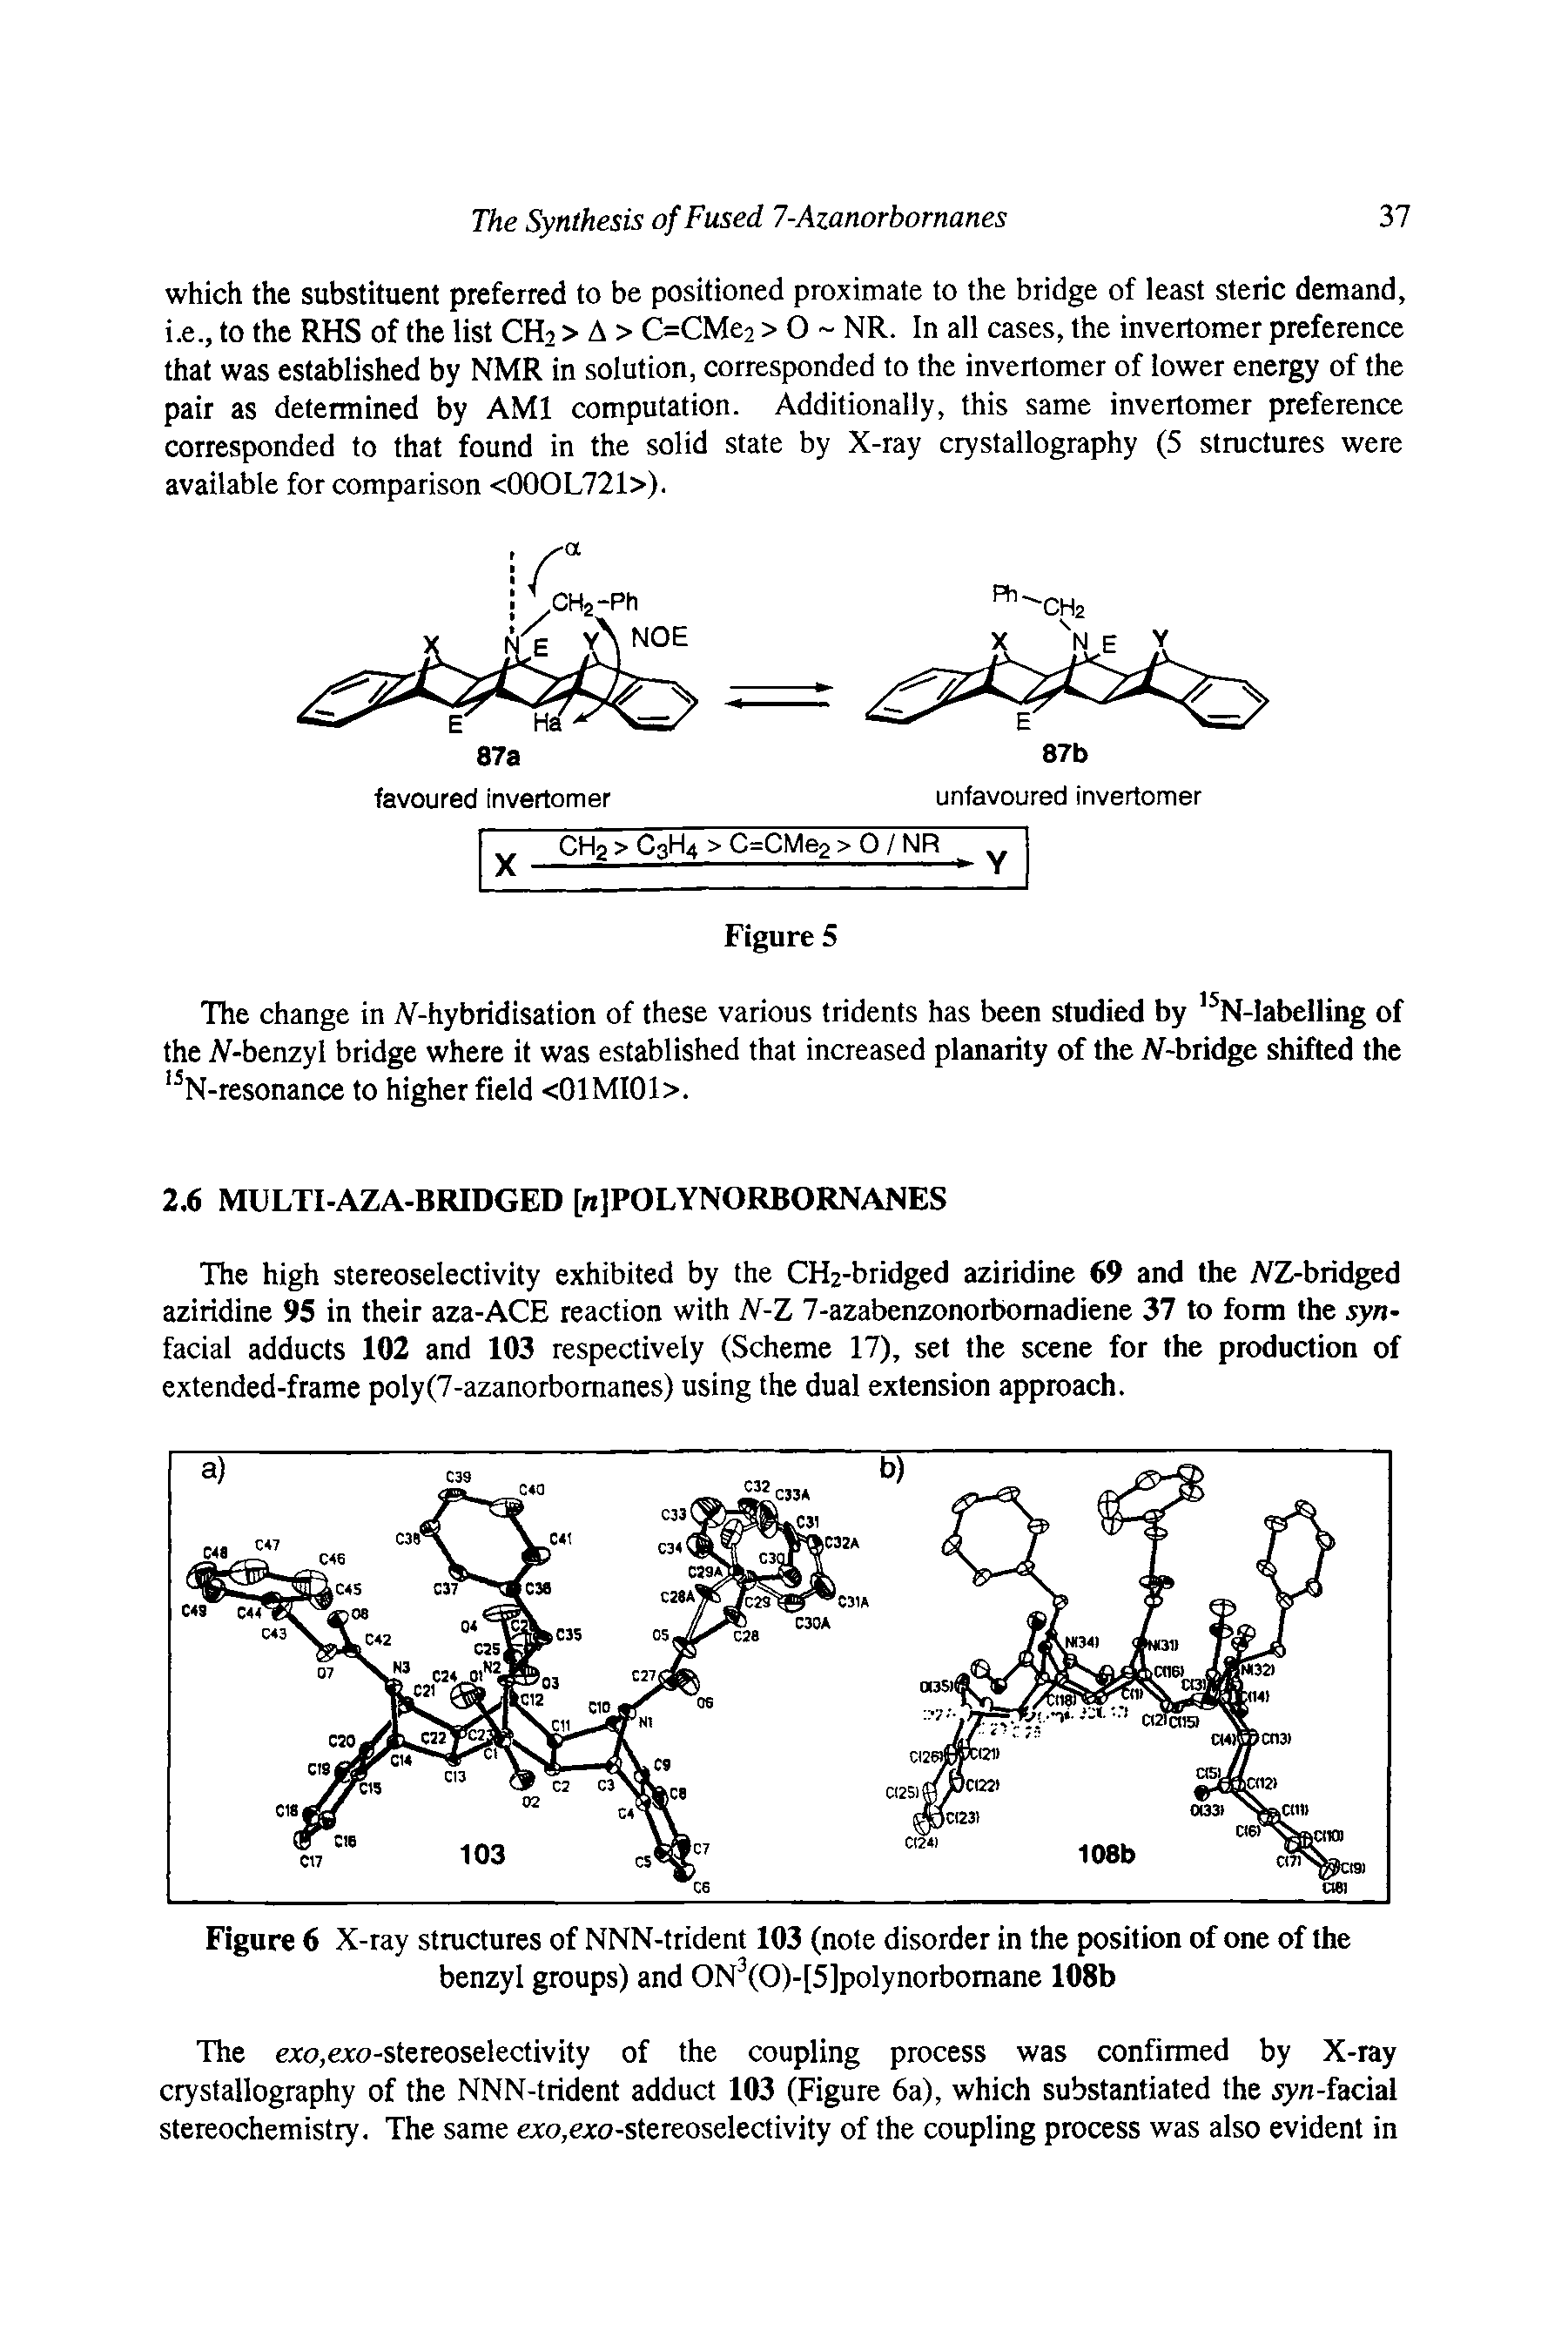 Figure 6 X-ray structures of NNN-trident 103 (note disorder in the position of one of the benzyl groups) and ON3(0)-[5]polynorbomane 108b...